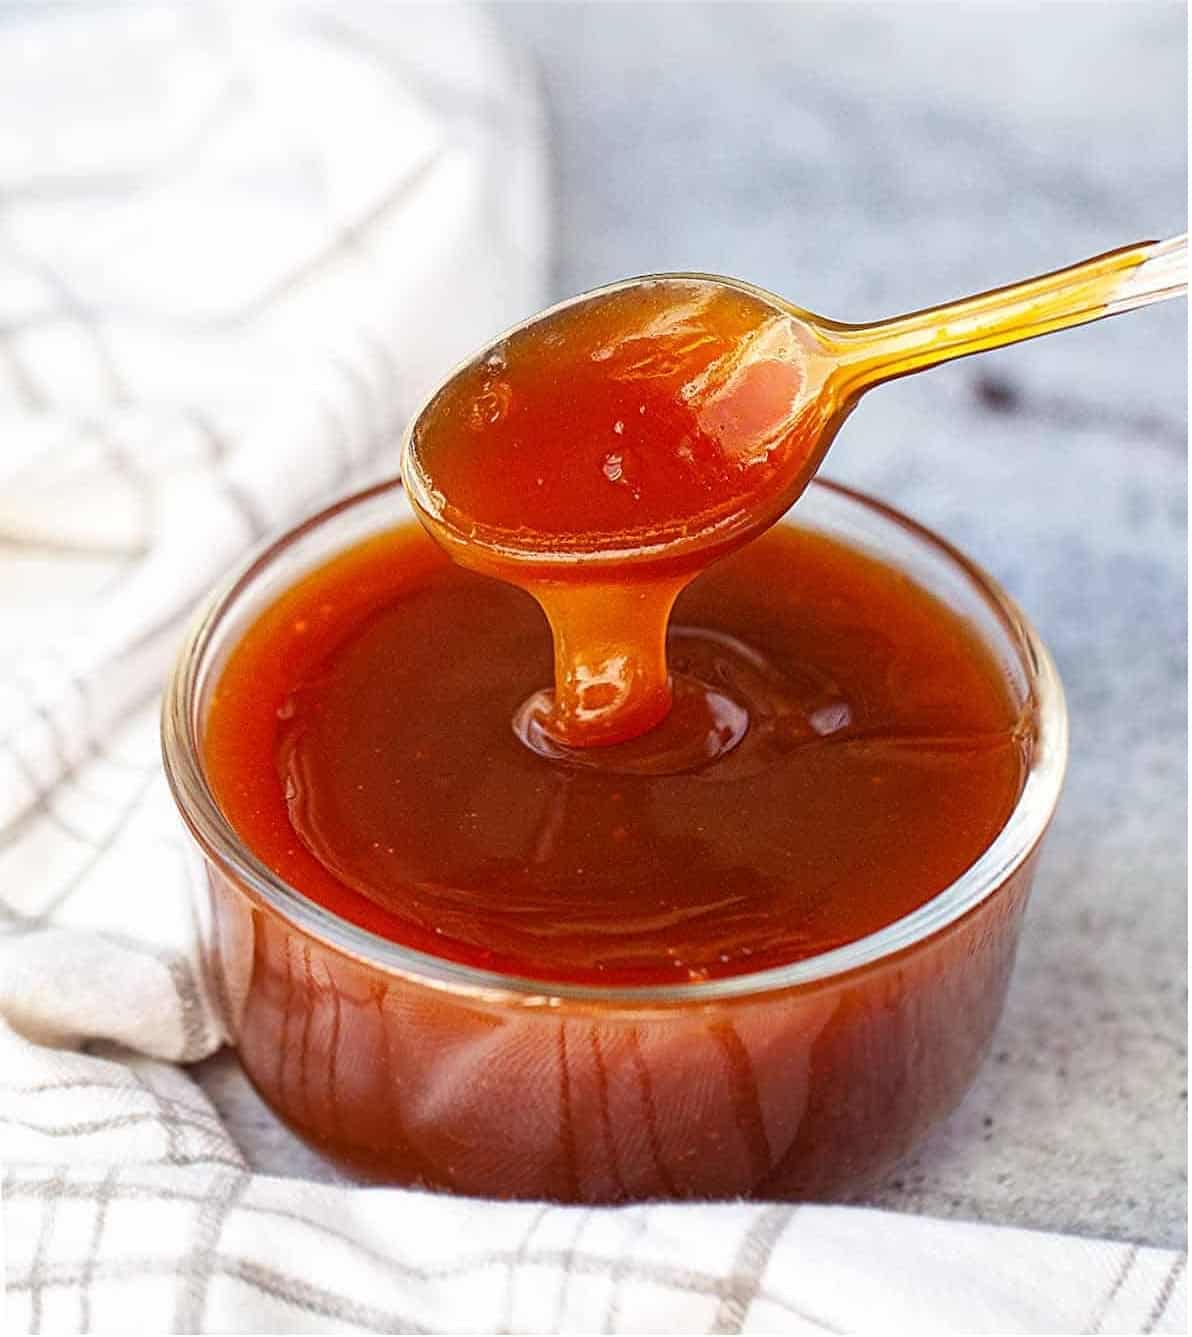 Chinese sweet and sour sauce recipe